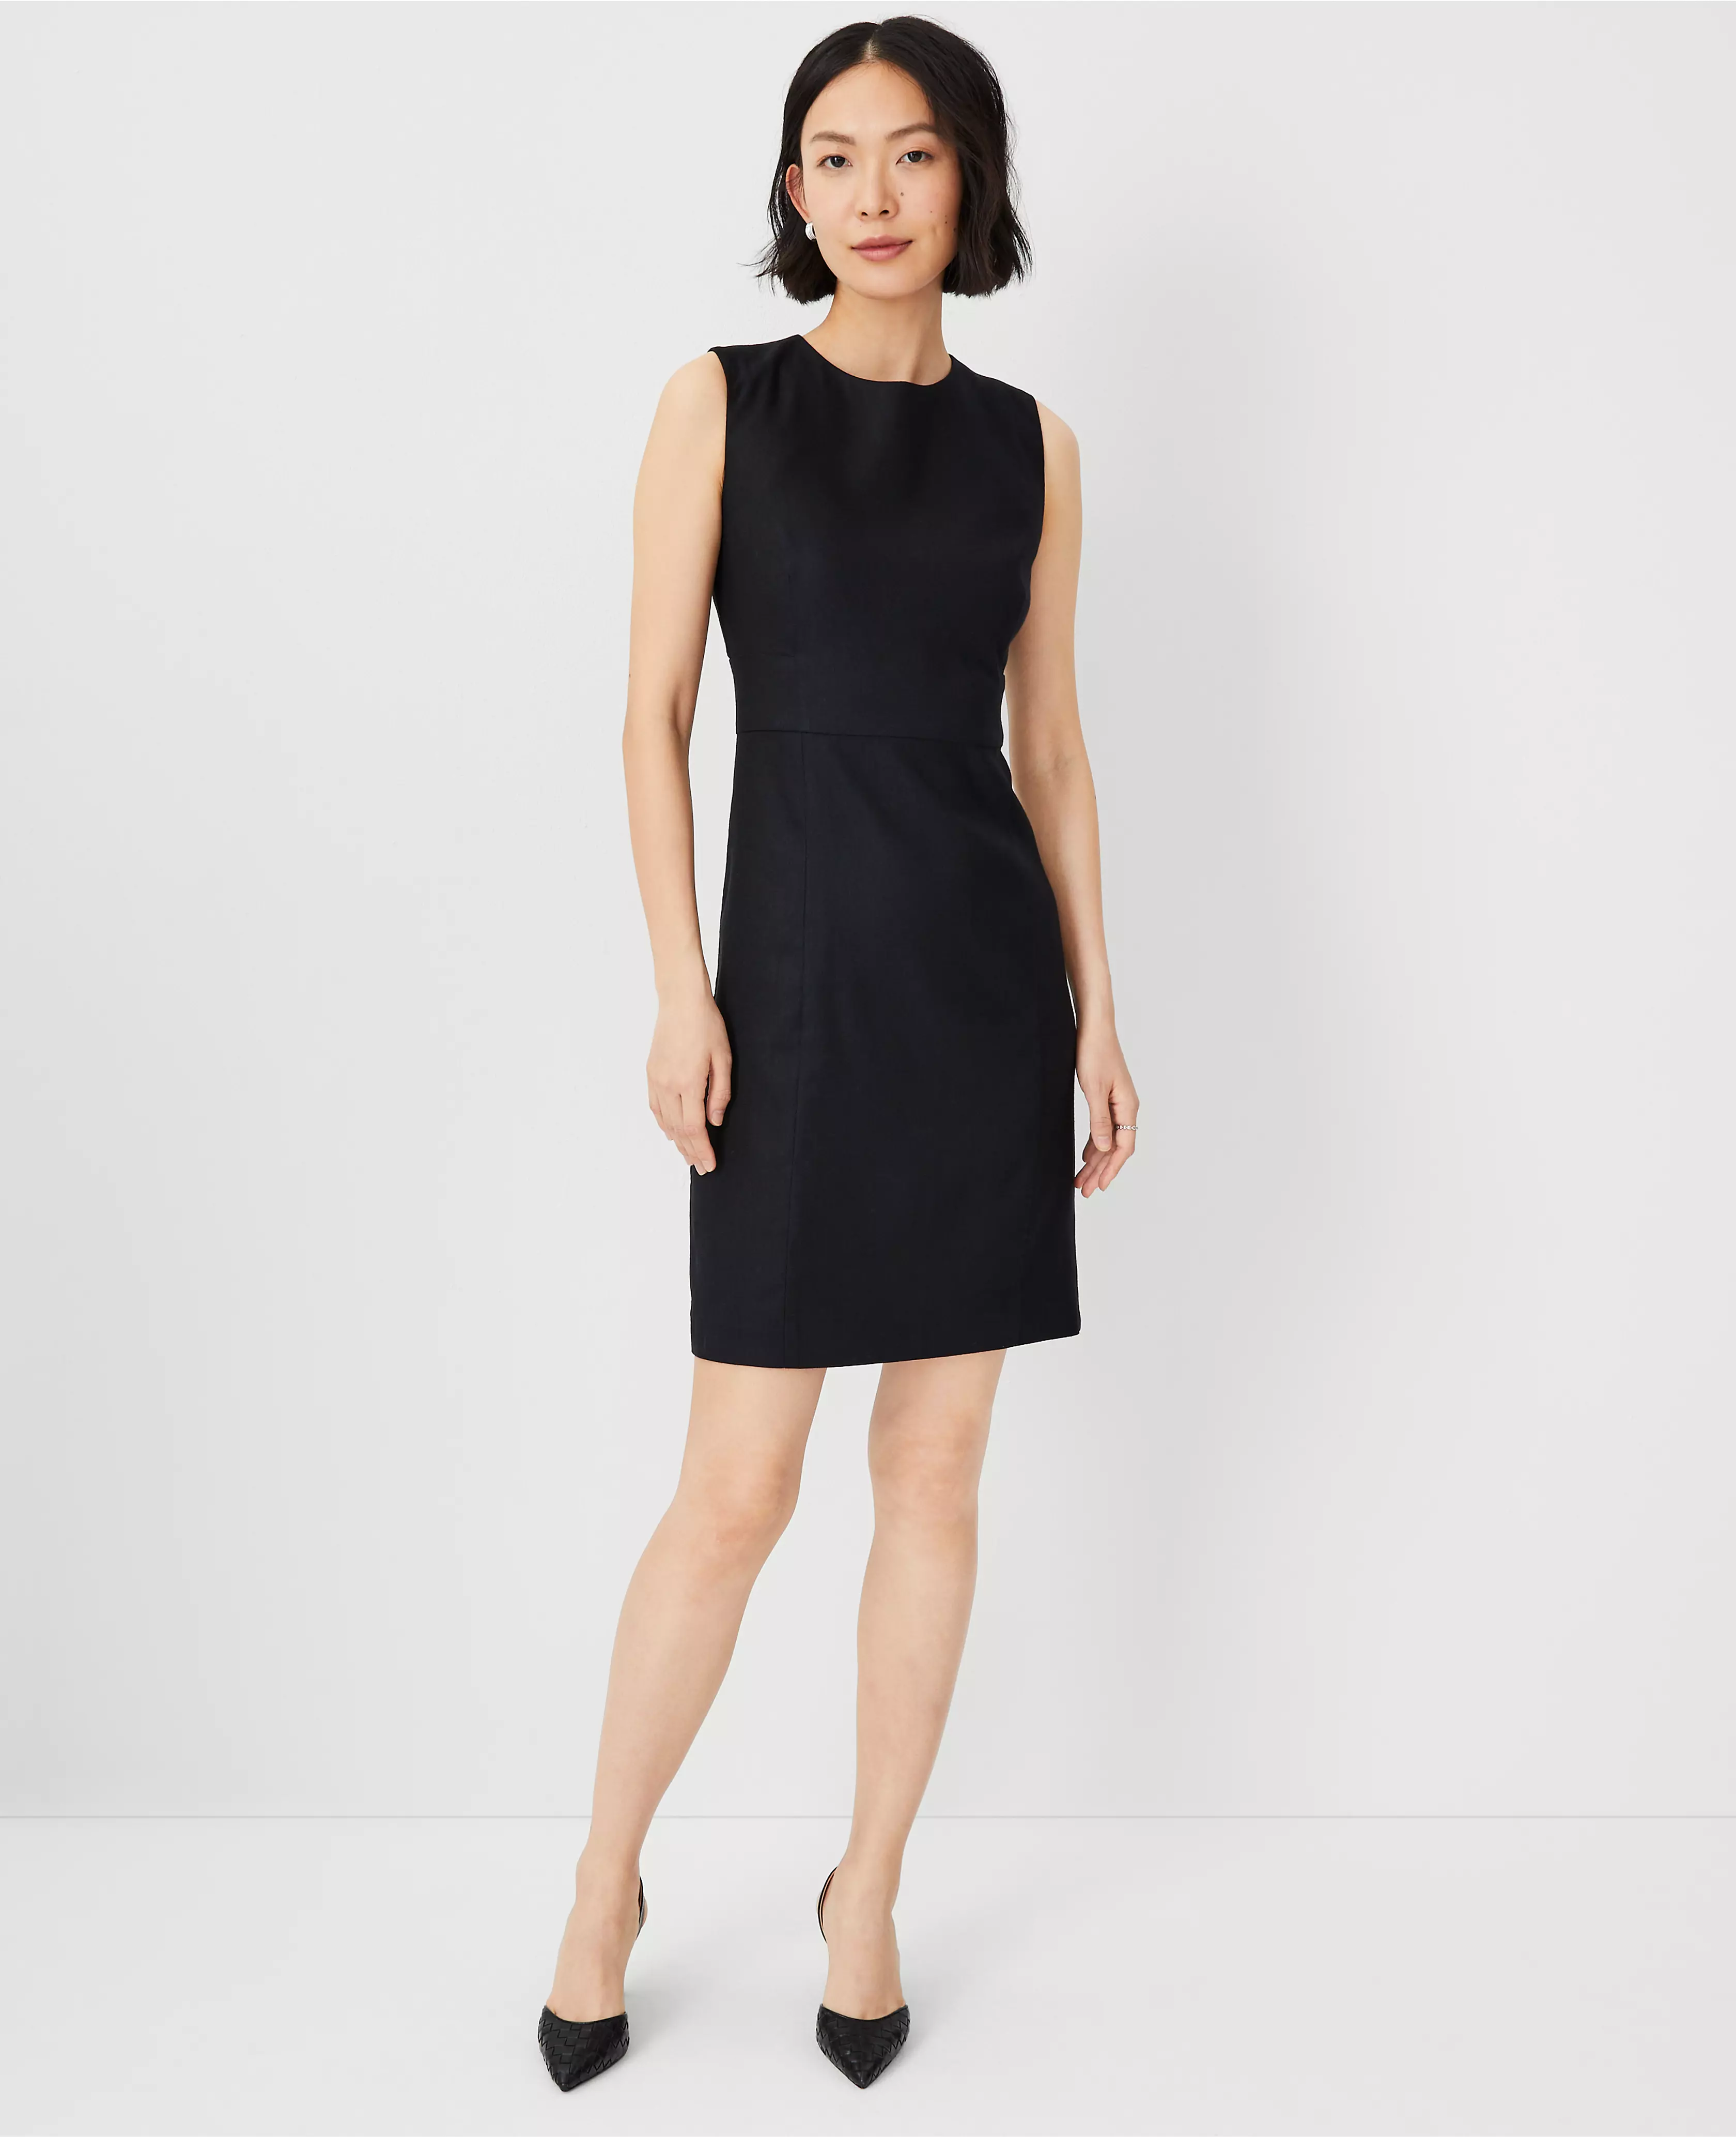 The Petite Seamed Fitted Shift Dress in Linen Twill